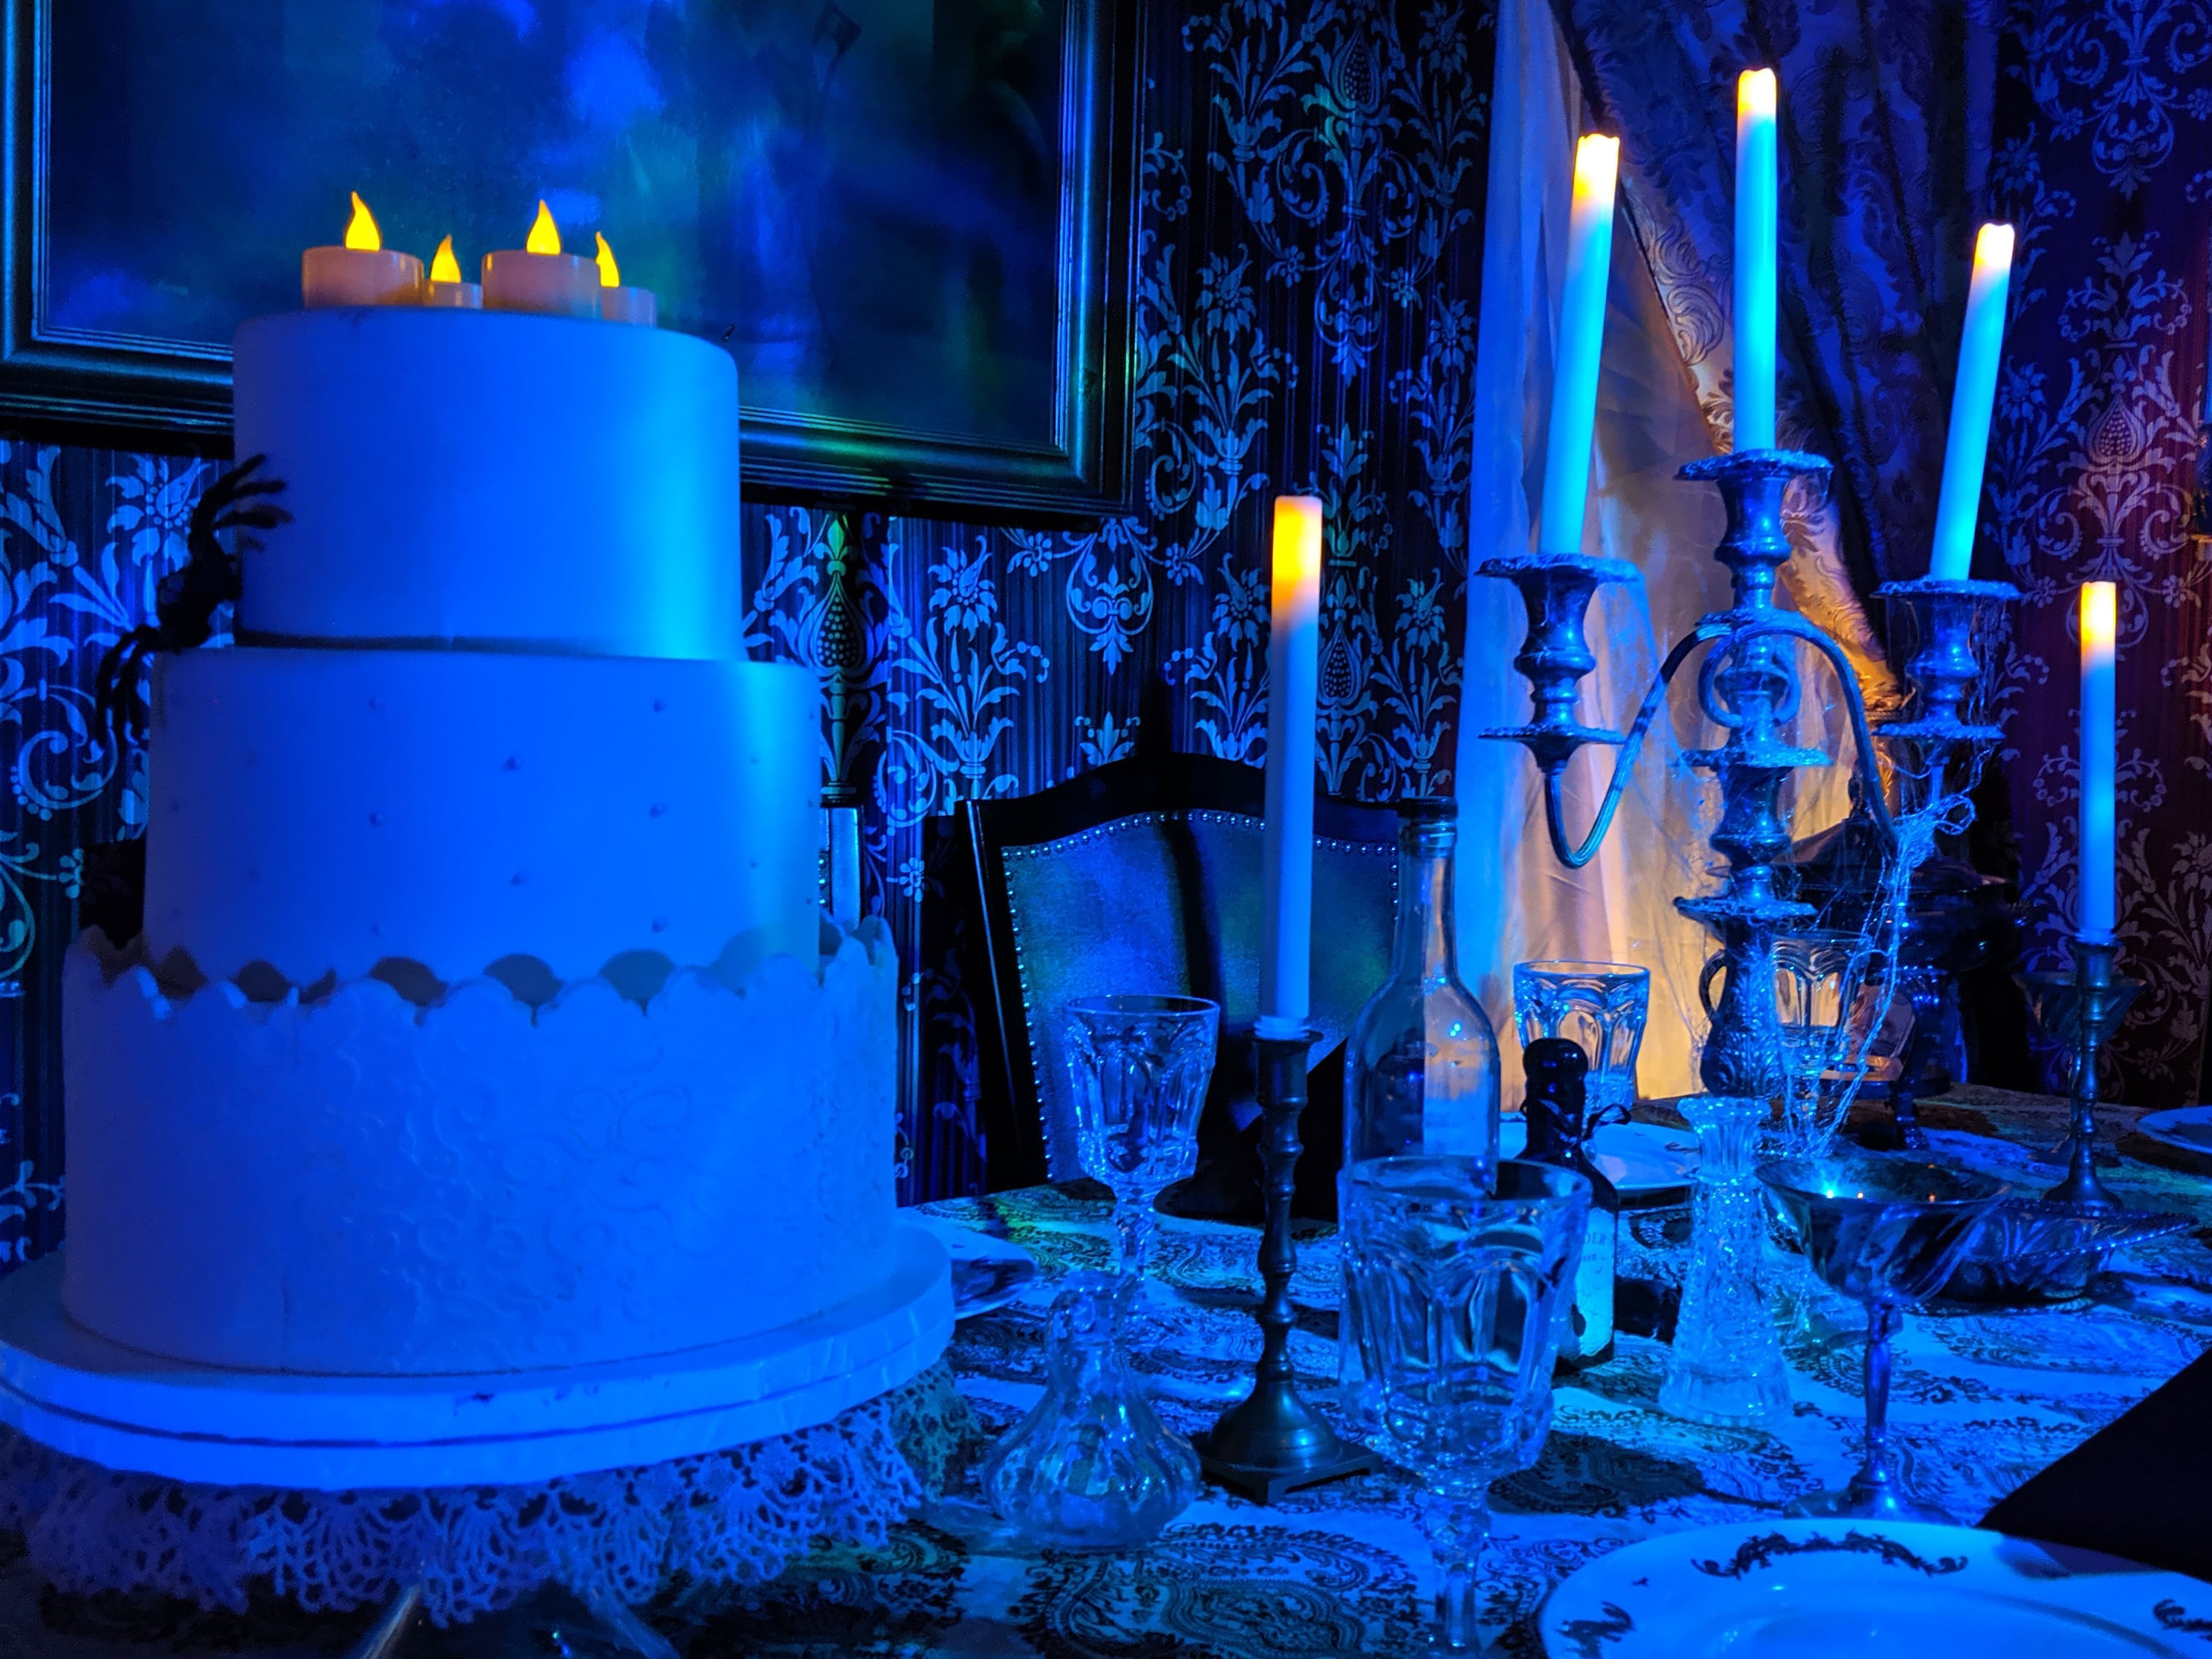 haunted house dining room